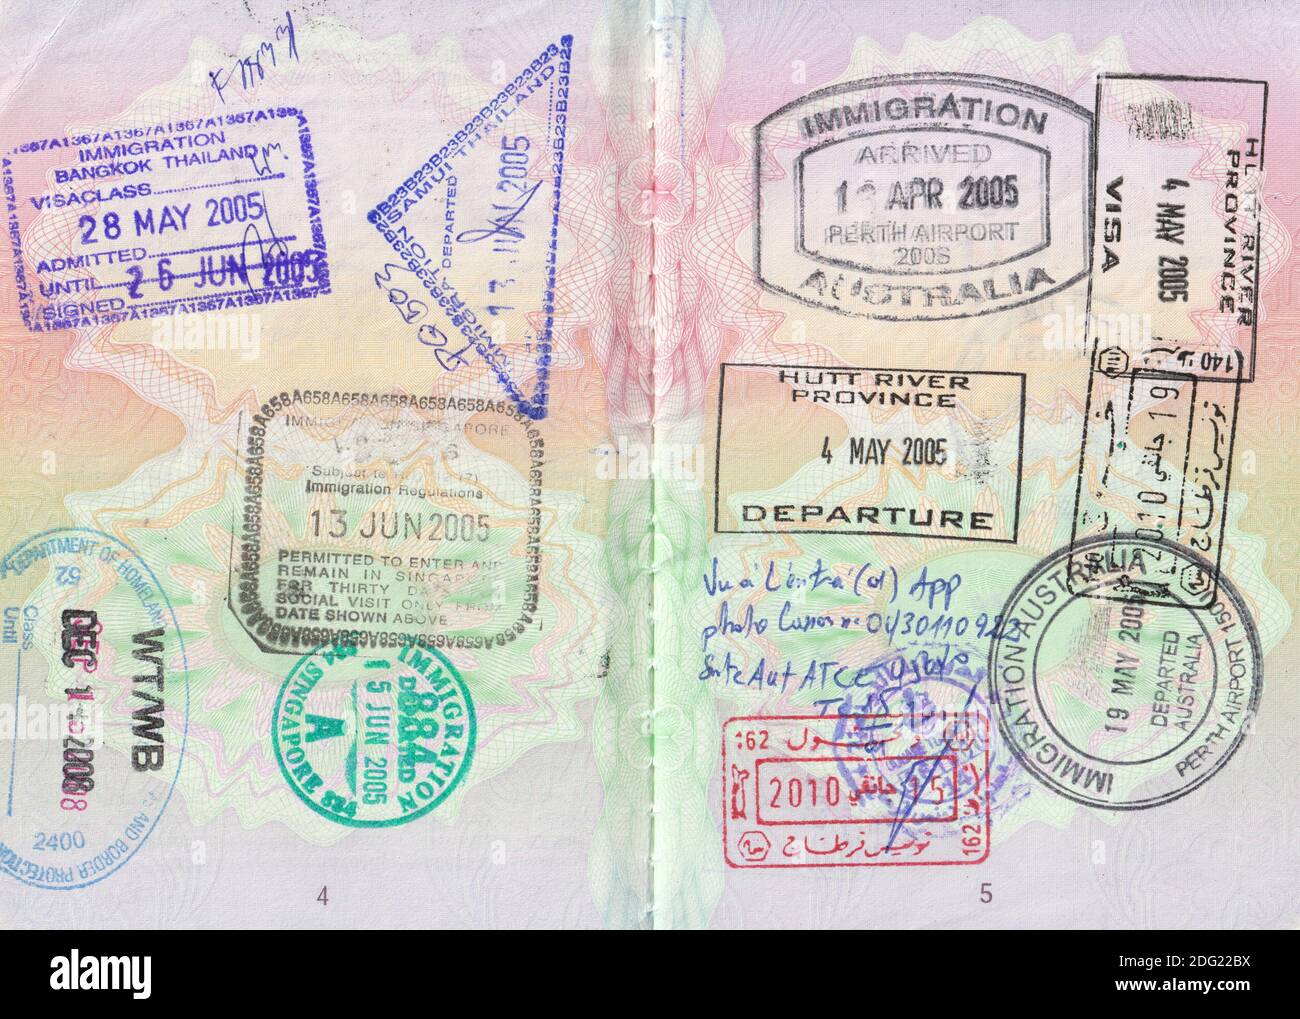 UK passport pages with stamps from USA, Thailand, Singapore, Australia, Tunisia and Hutt River Province (see description for full details) Stock Photo